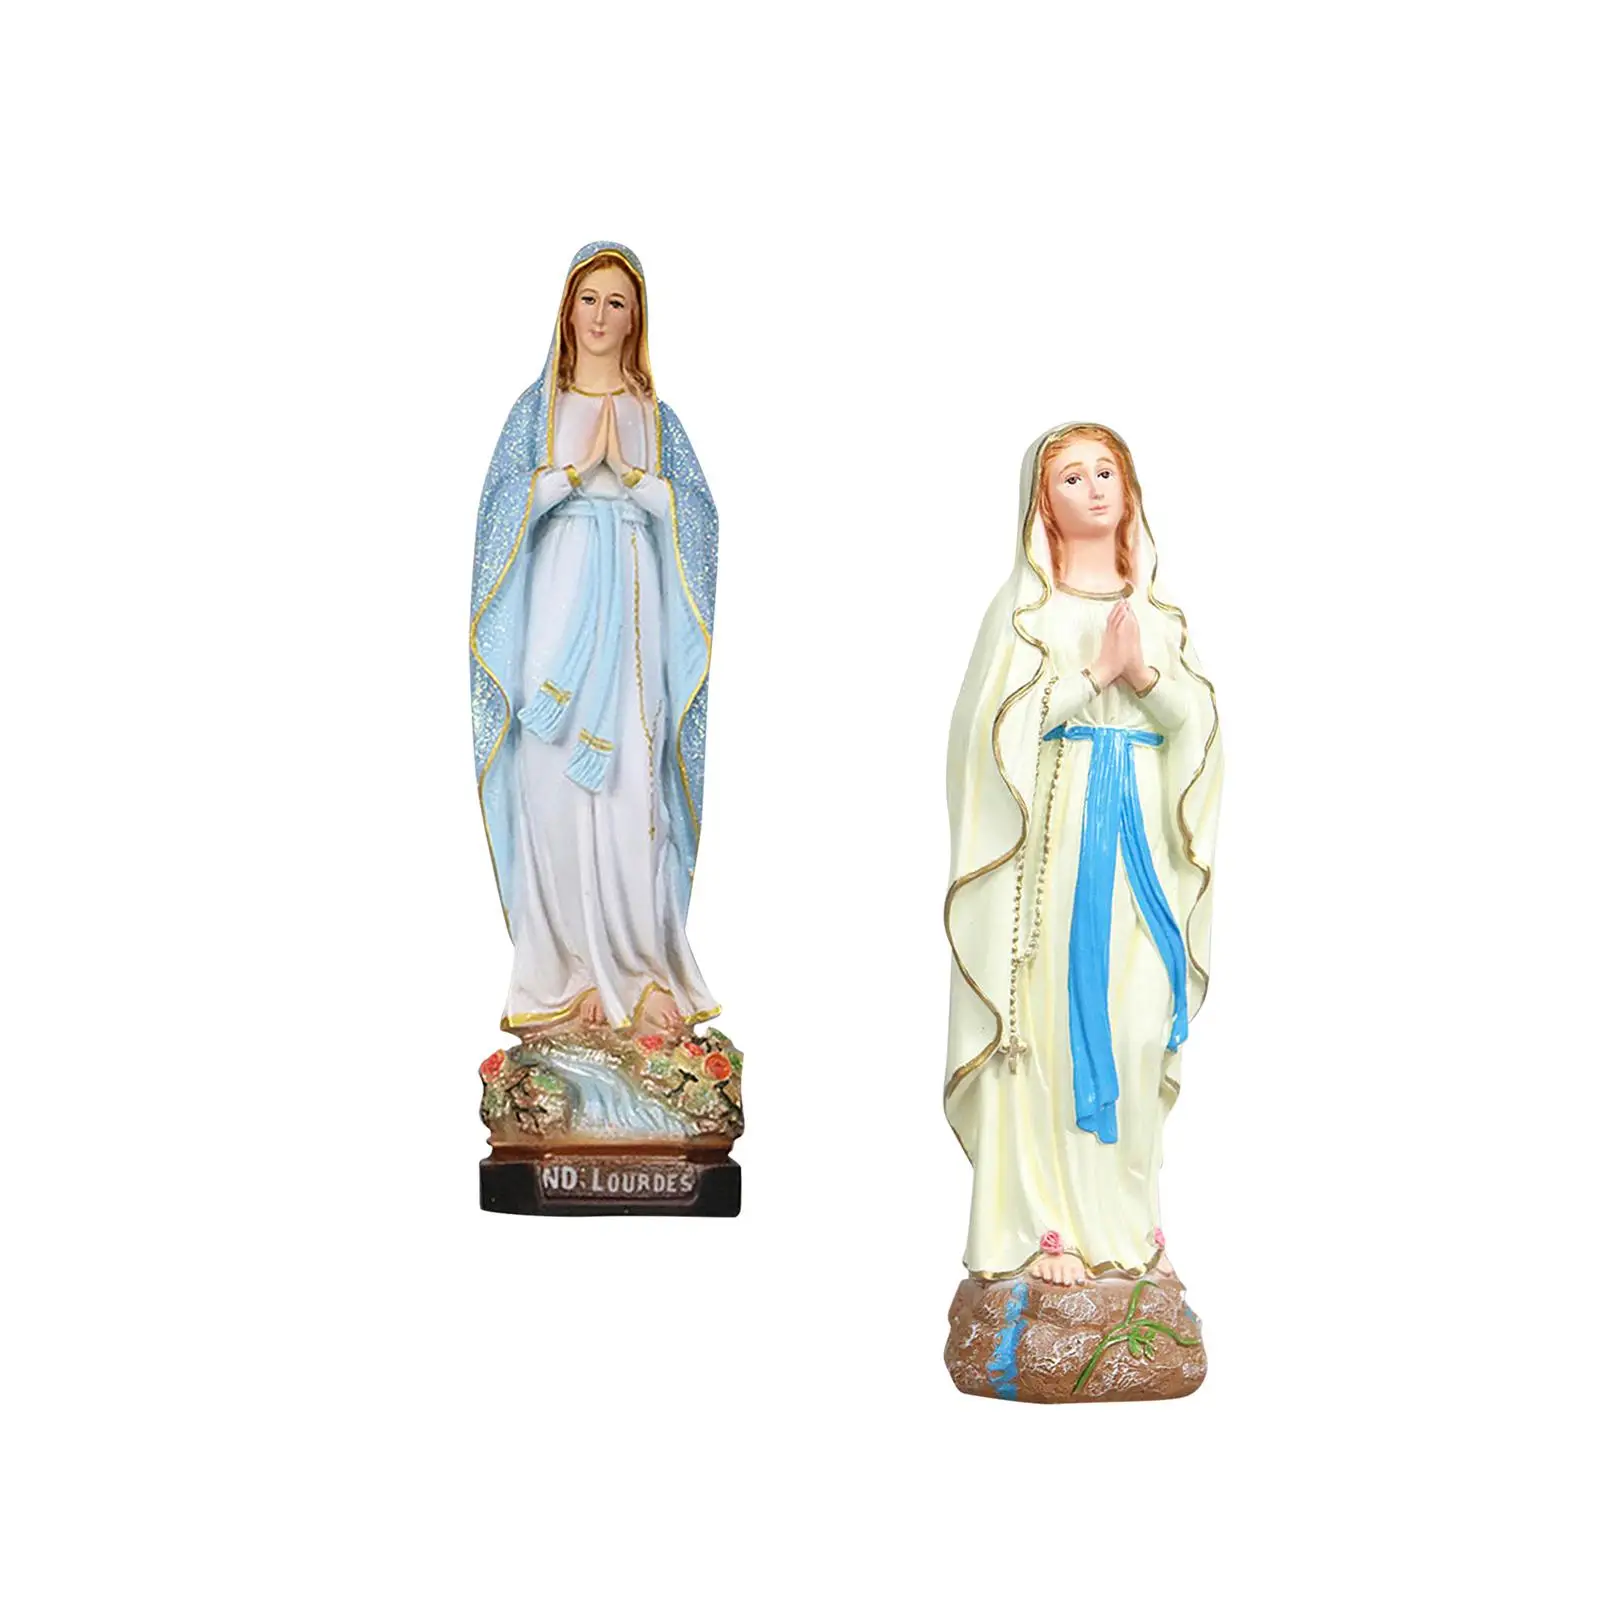 Mother Mary Figurine on Base Statues Worship Praying Religious Resin Décor for Bedroom Tabletop Living Room Home Desk